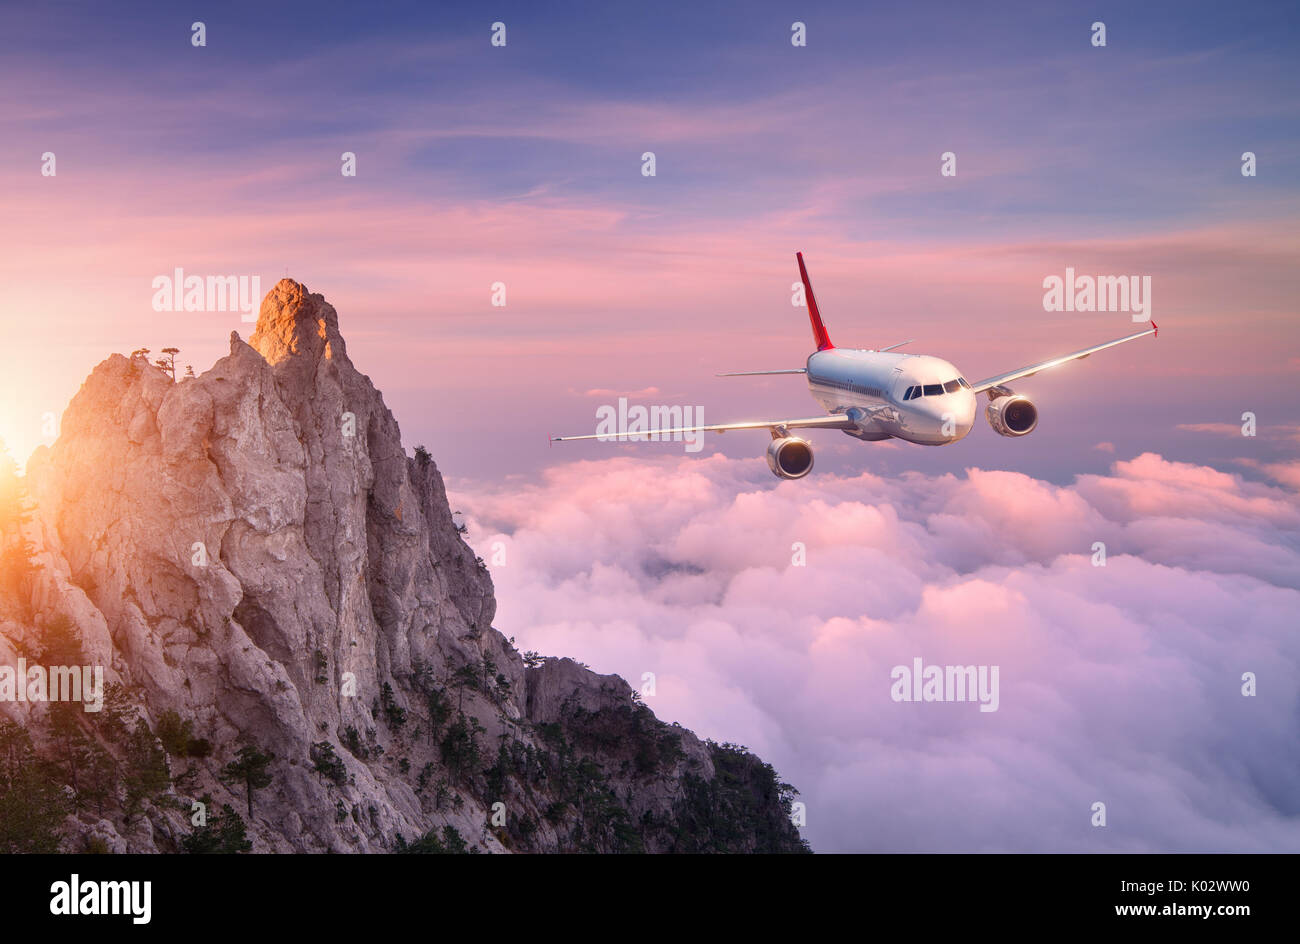 Airplane is flying over clouds at sunset. Landscape with white passenger airplane, rocks, sea and purple sky with sun in summer. Passenger aircraft is Stock Photo